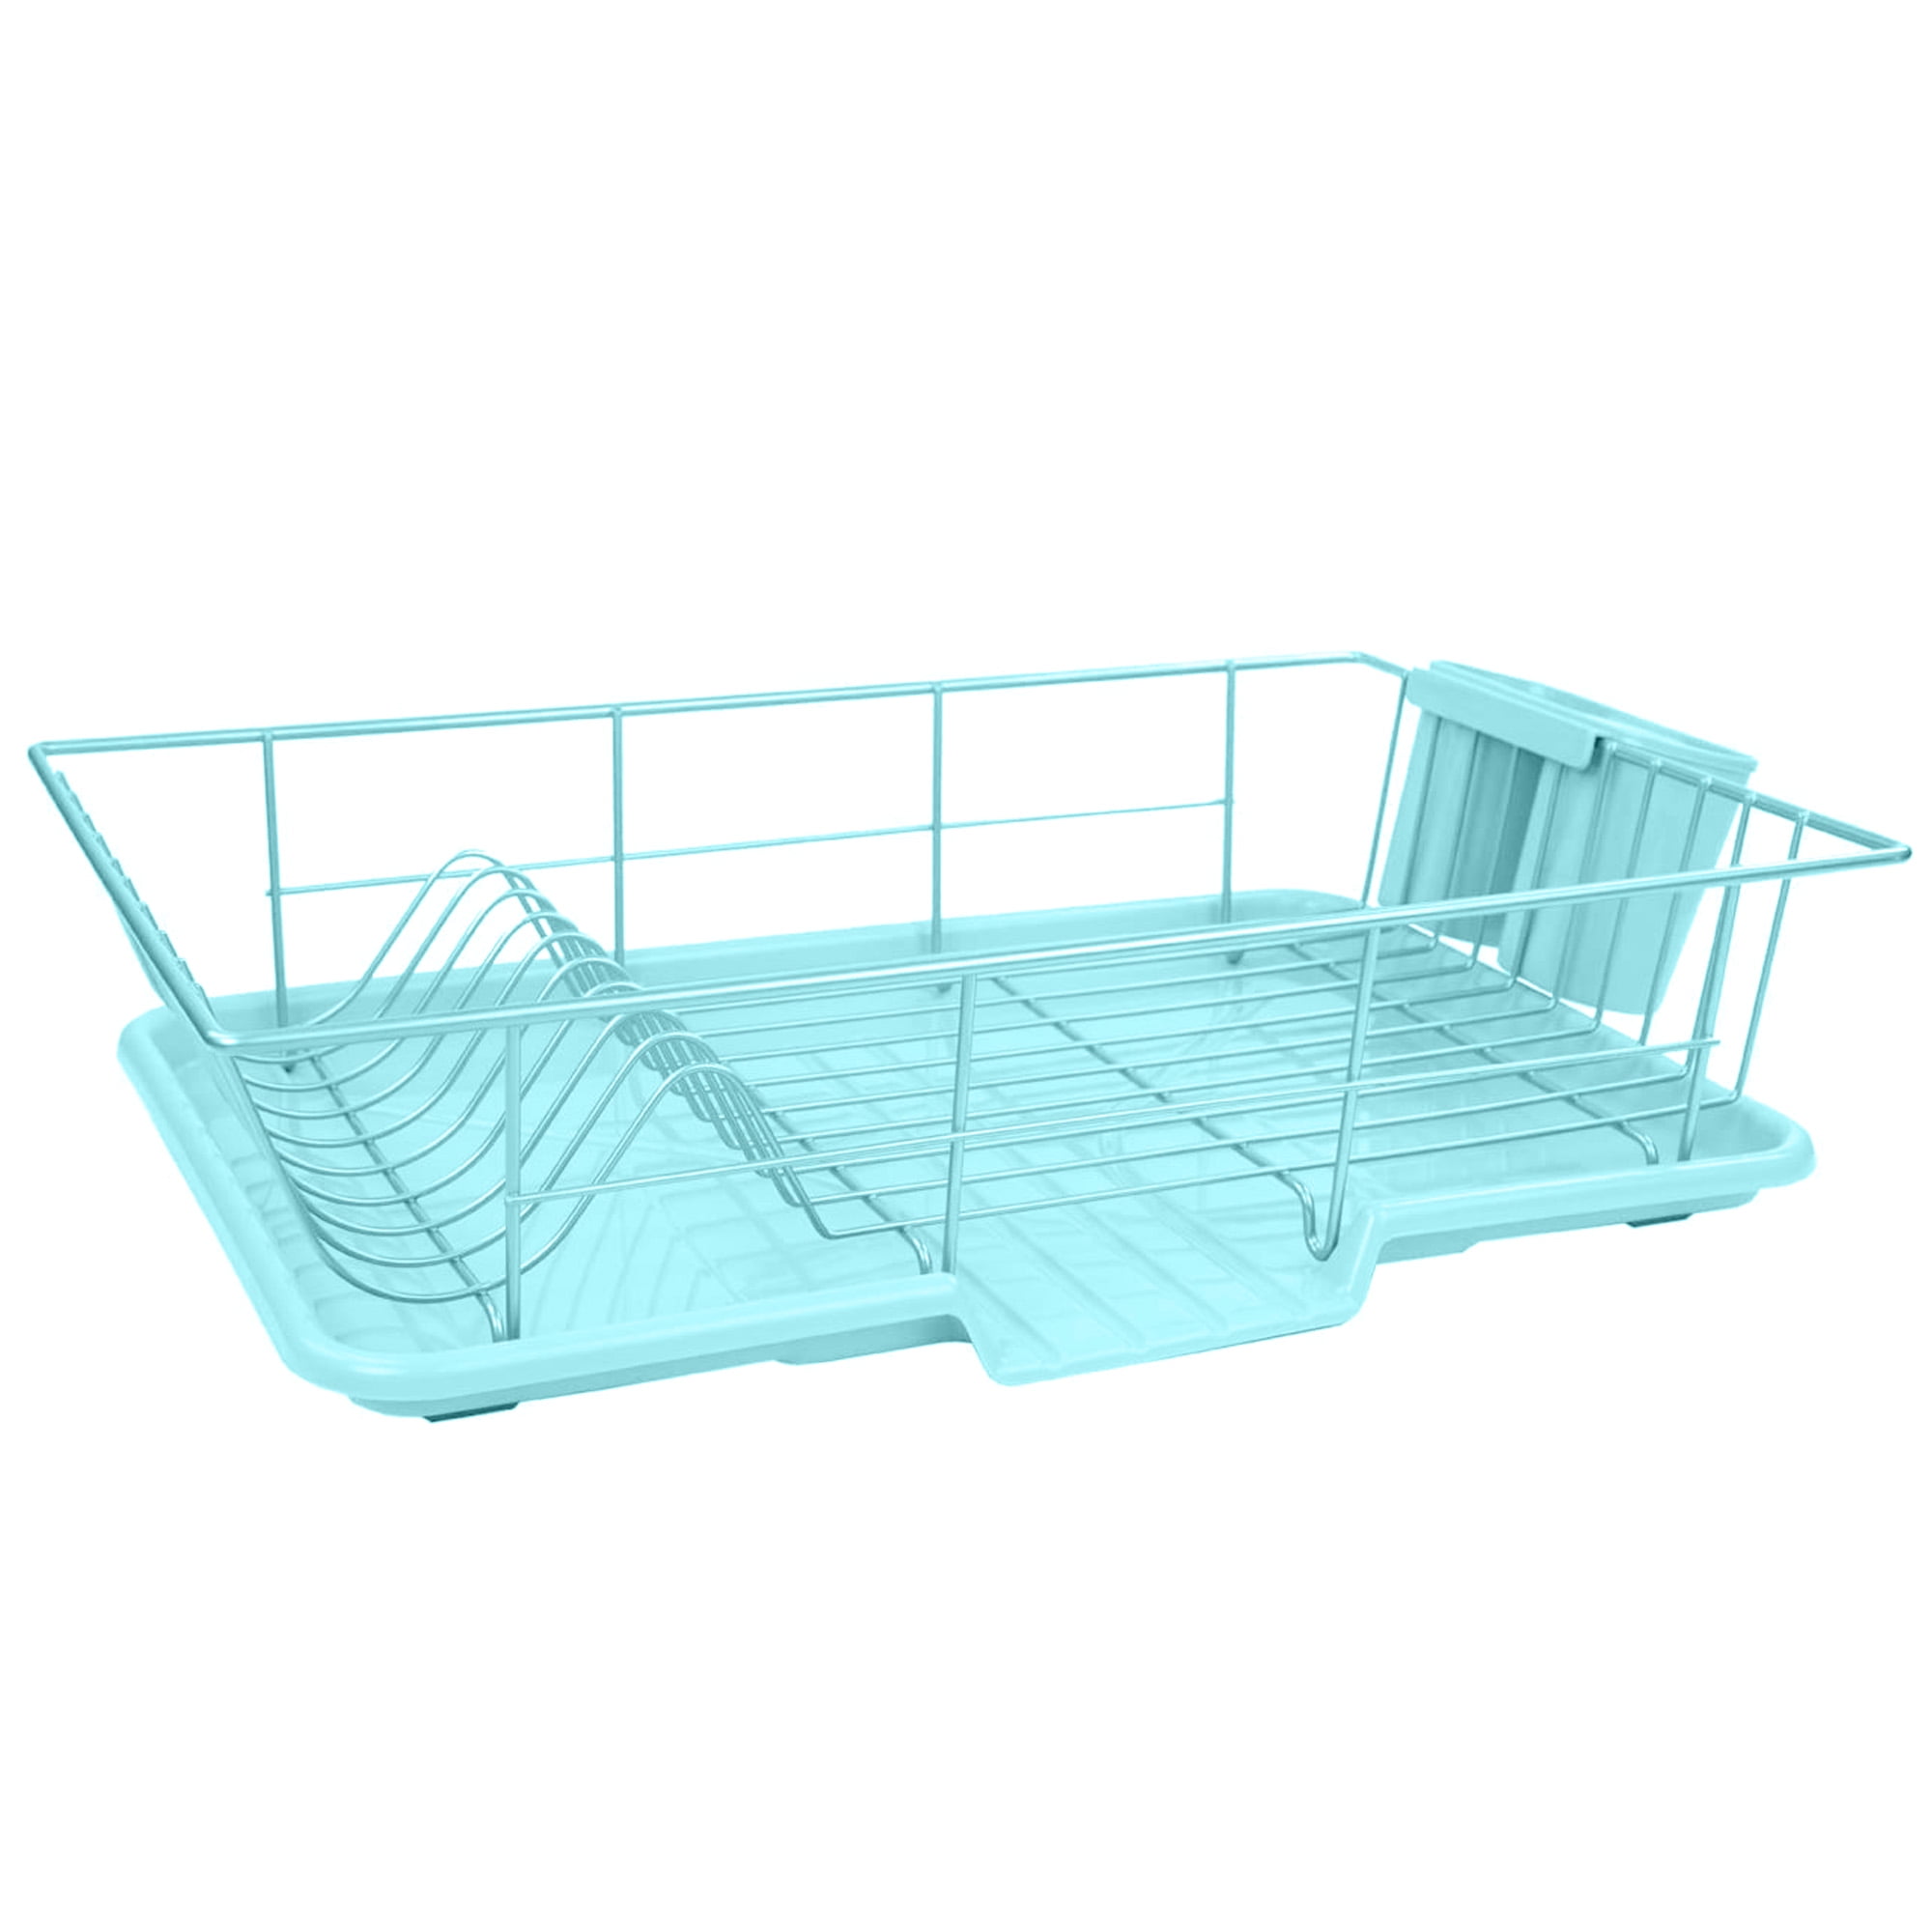 PXRACK Large Dish Drying Rack - Expandable Dish Rack with Drainboard Set, Multifunctional Dish Rack for Kitchen Counter, Anti-rust Drying Dish Rack